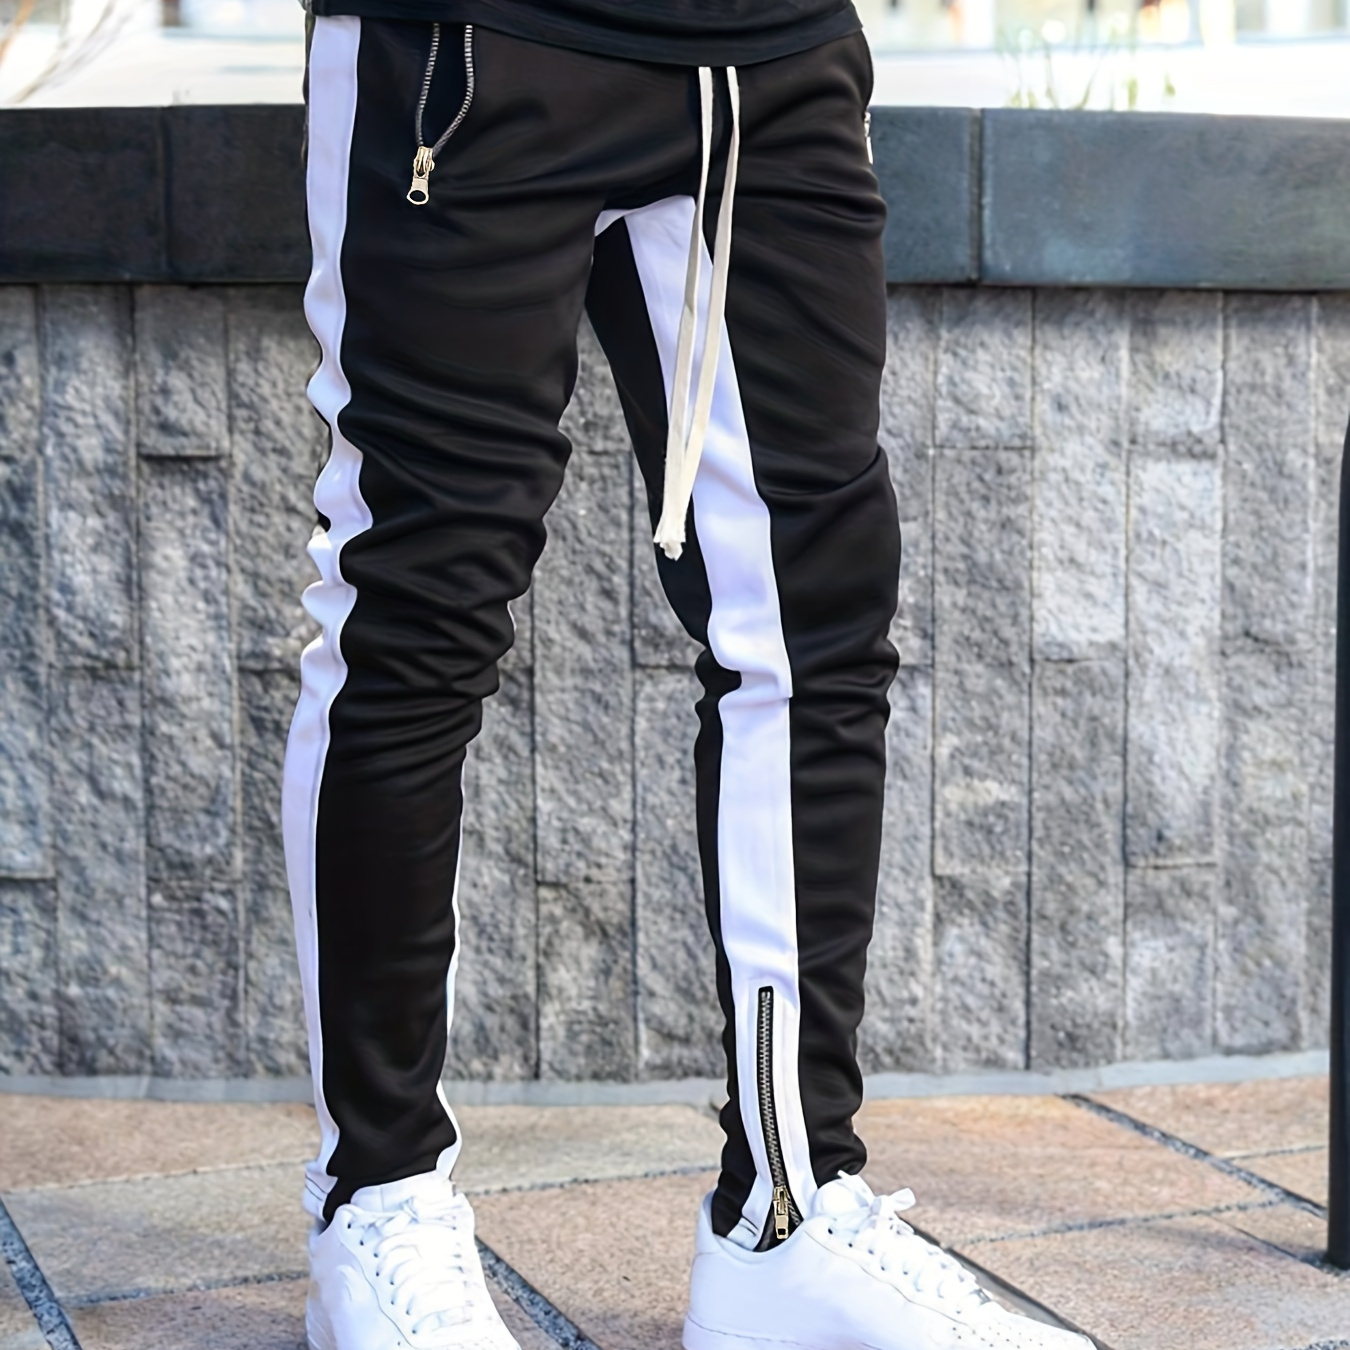 

Zipper Pocket Joggers, Men's Casual Loose Fit Slightly Stretch Waist Drawstring Pants For The 4 Seasons Fitness Cycling